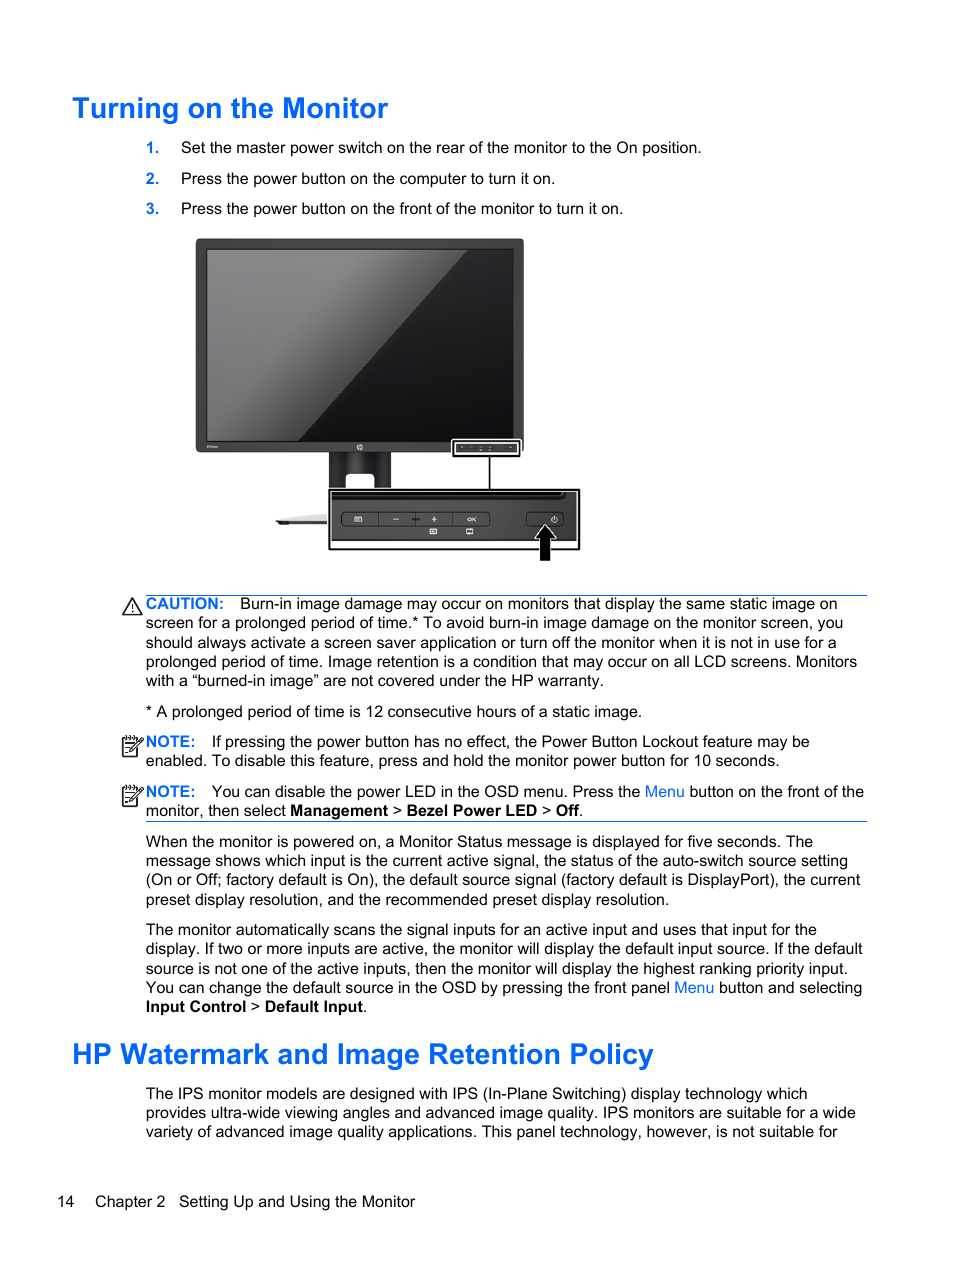 Turning on the monitor, Hp watermark and image retention policy | HP Z  Display Z27i 27-inch IPS LED Backlit Monitor User Manual | Page 20 / 38